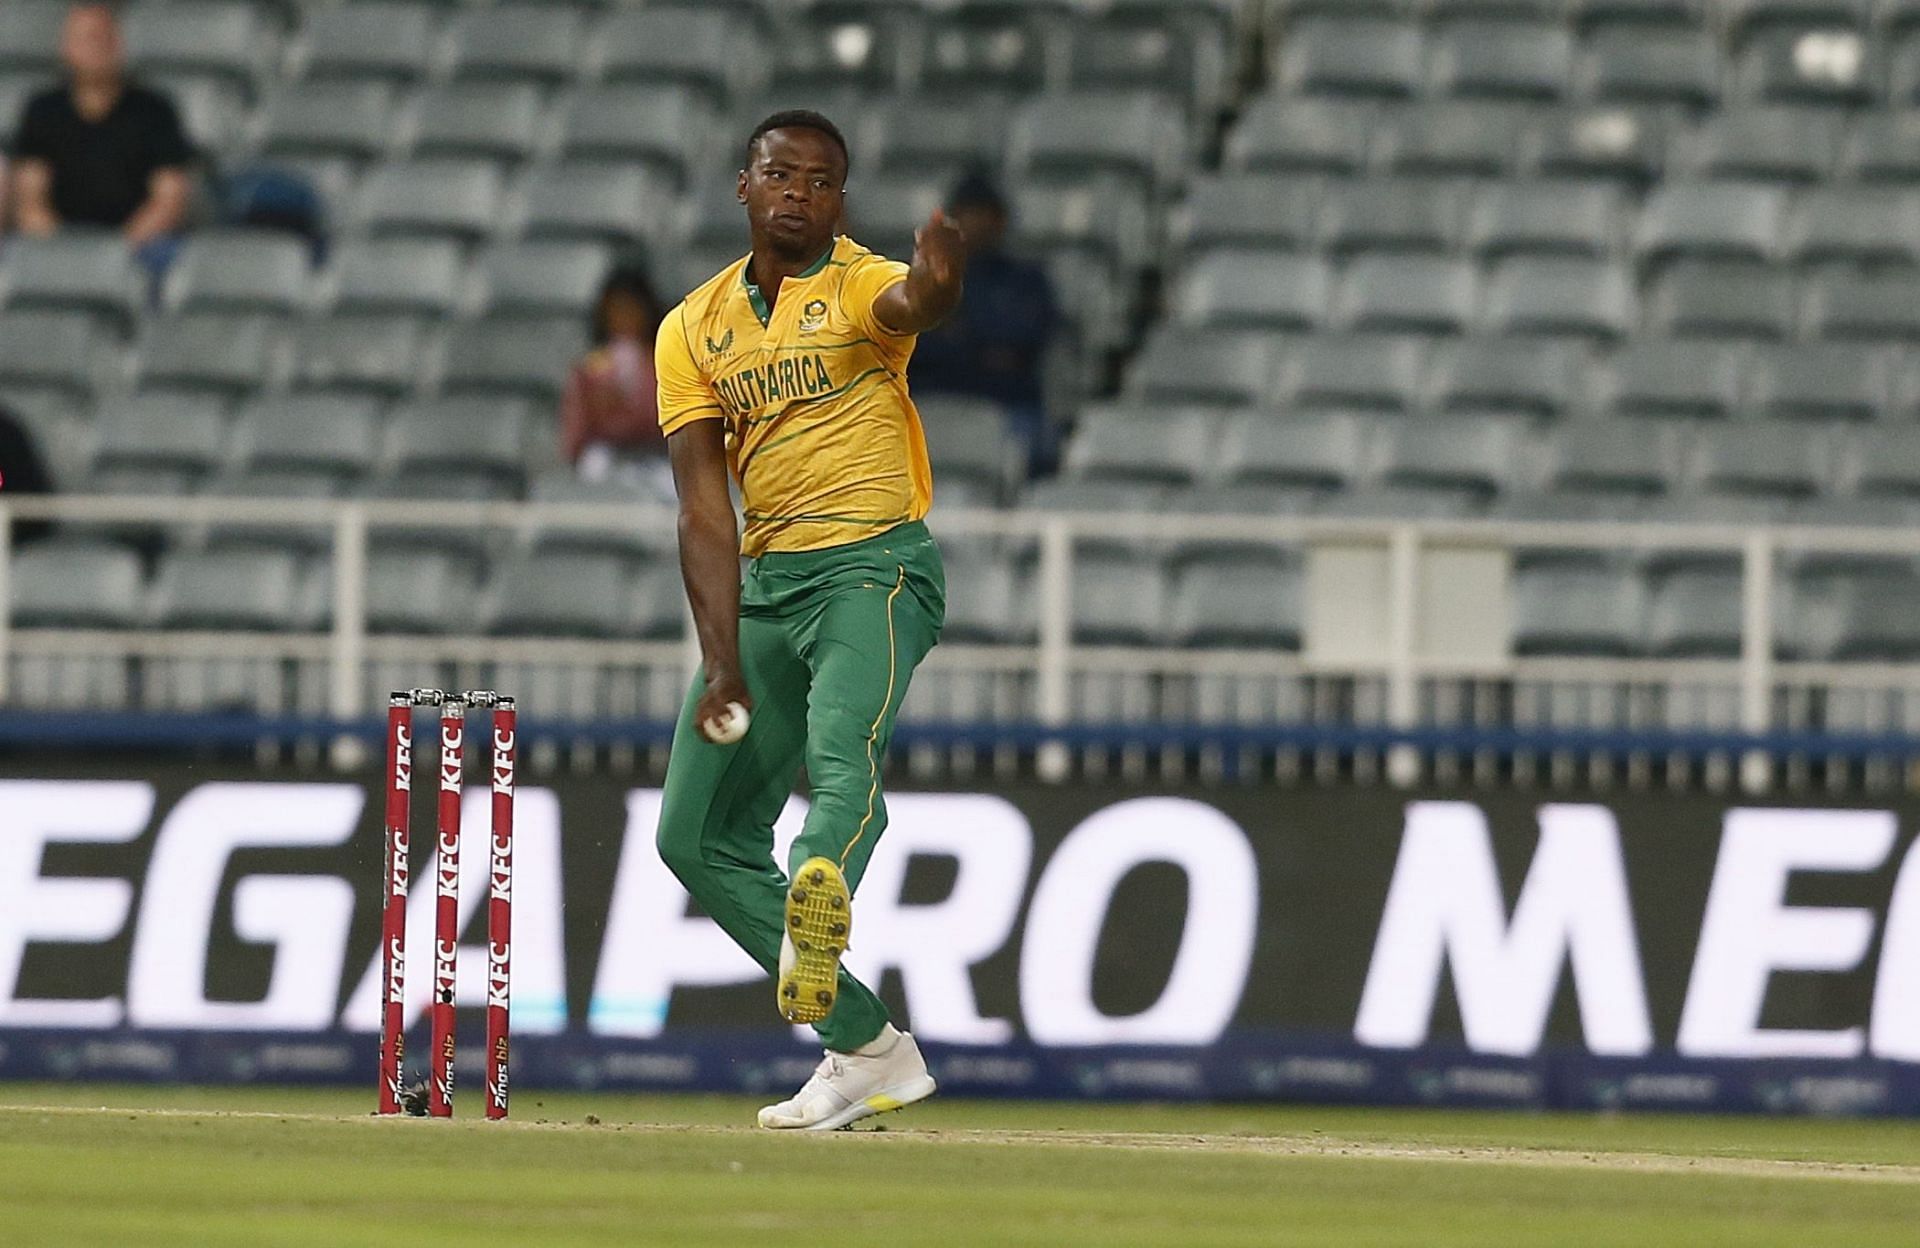 Kagiso Rabada has to become the leader of the bowling attack.